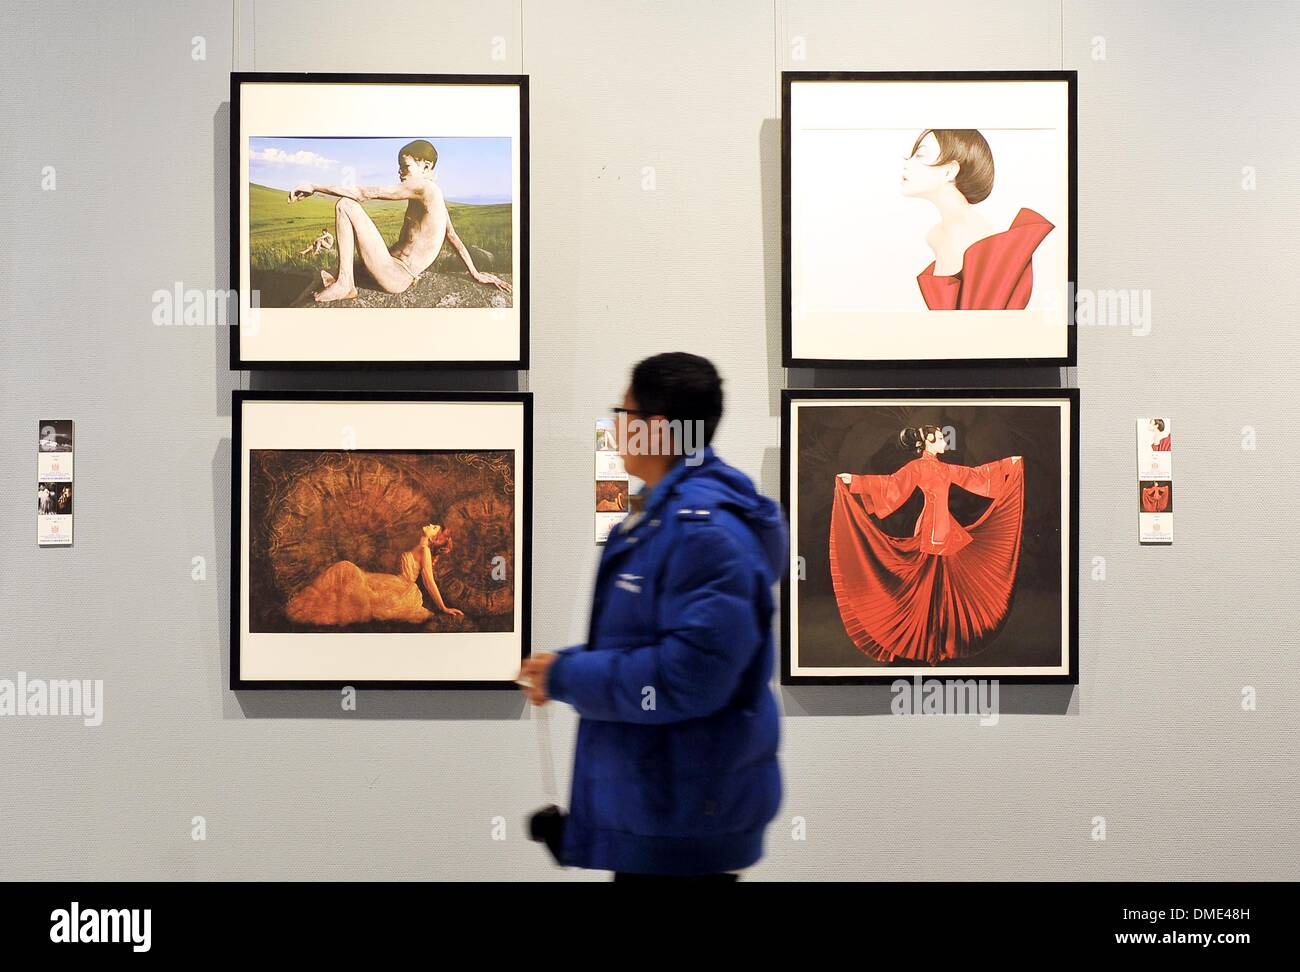 Jinan, China's Shandong Province. 14th Dec, 2013. A visitor looks at an art work displayed in an achievement exhibition of the nationwide art museum support program at the Shandong Art Museum in Jinan, capital of east China's Shandong Province, Dec. 14, 2013. Around 20 million RMB yuan (3.29 million U.S. dollars) has been spent in the support program since 2010, which benefits 53 art museums in 18 provinces. © Zhu Zheng/Xinhua/Alamy Live News Stock Photo